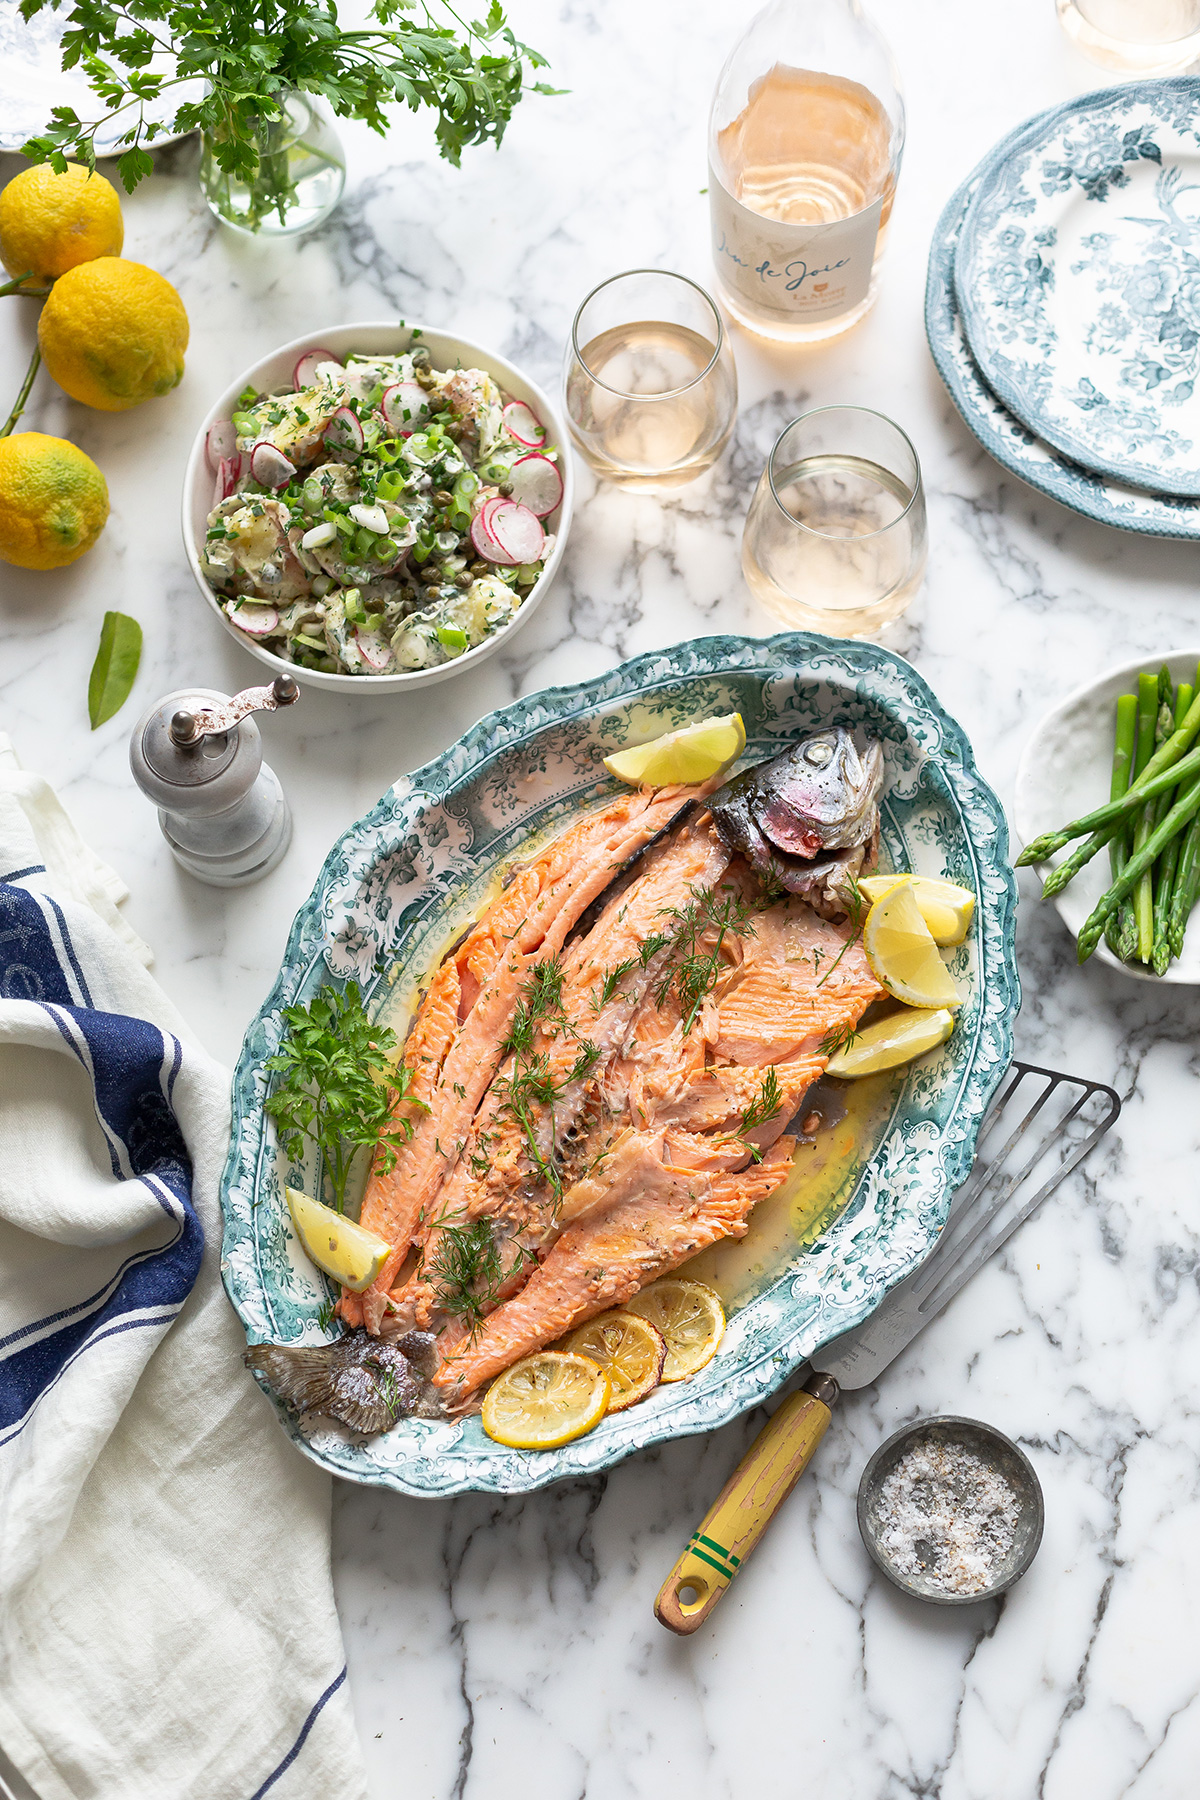 Baked whole trout with herbs & lemon